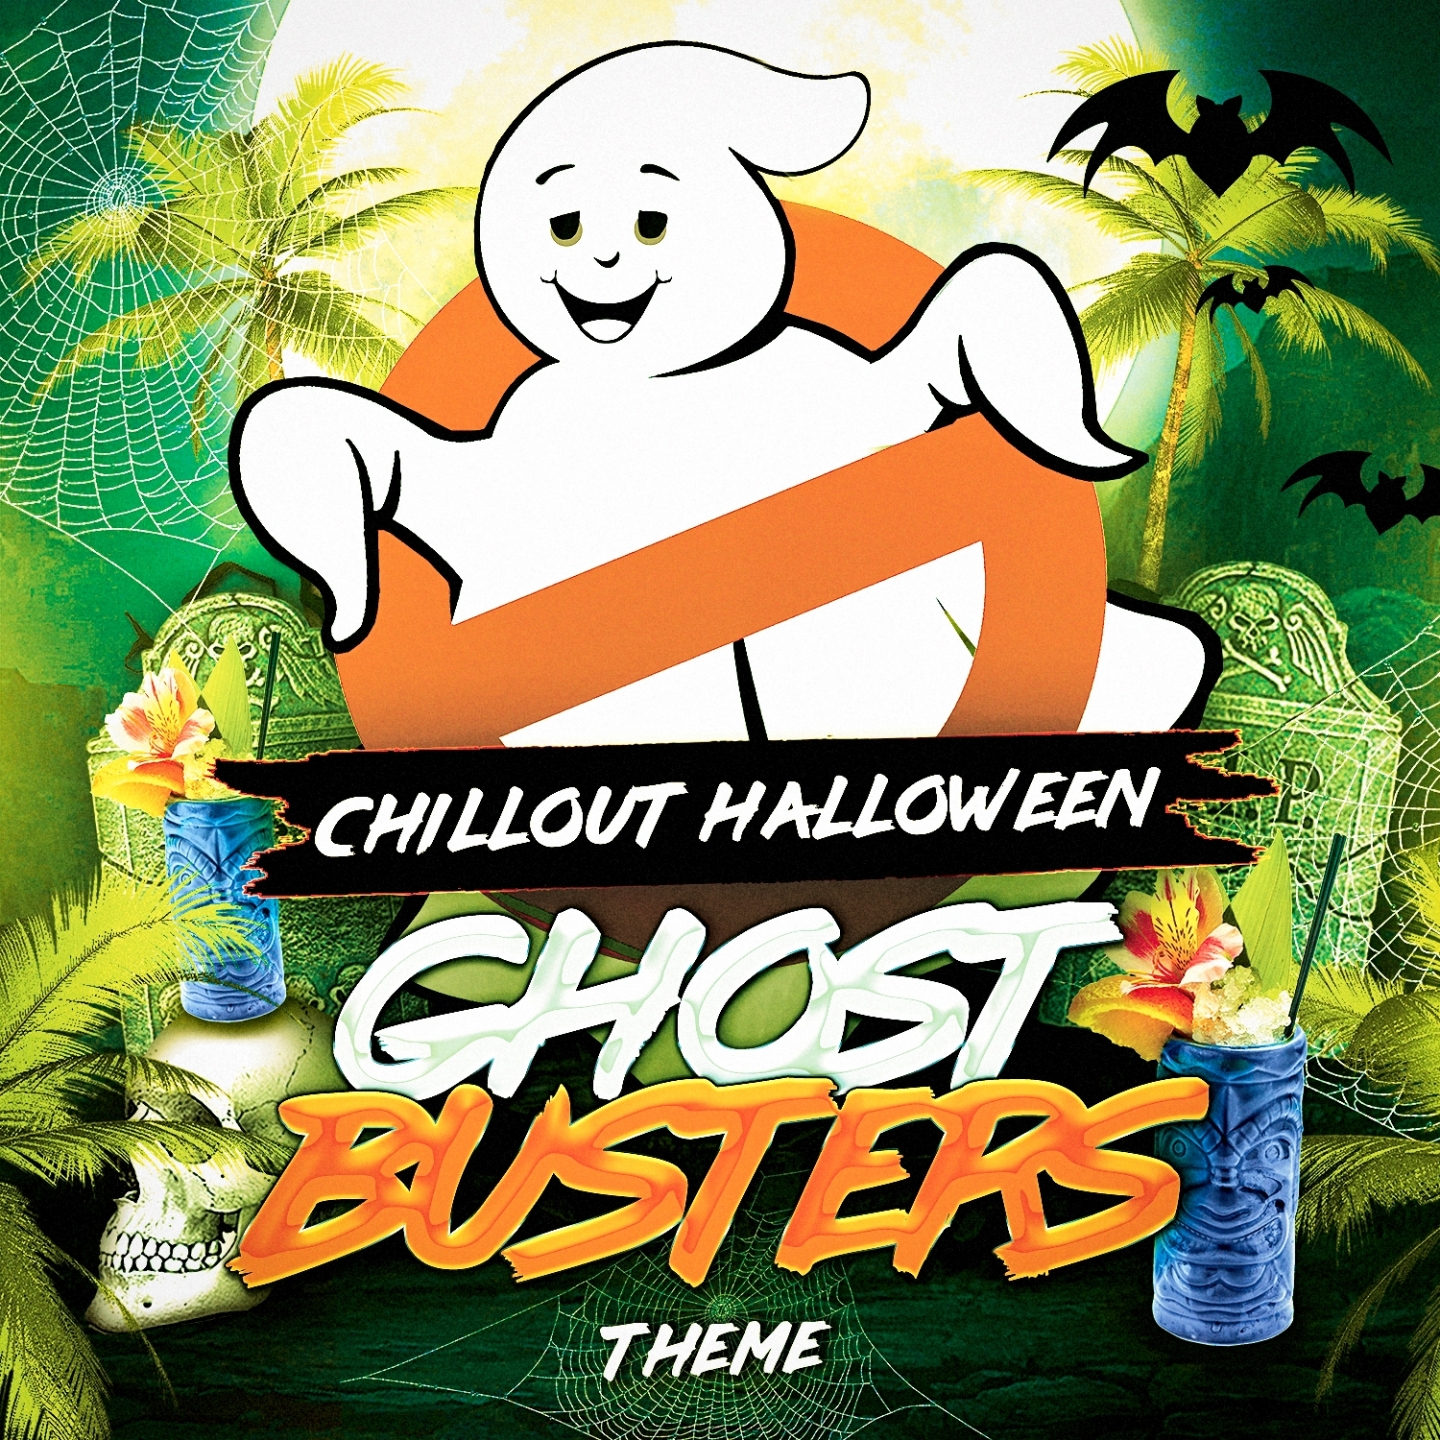 Chillout Halloween Ghostbusters Theme